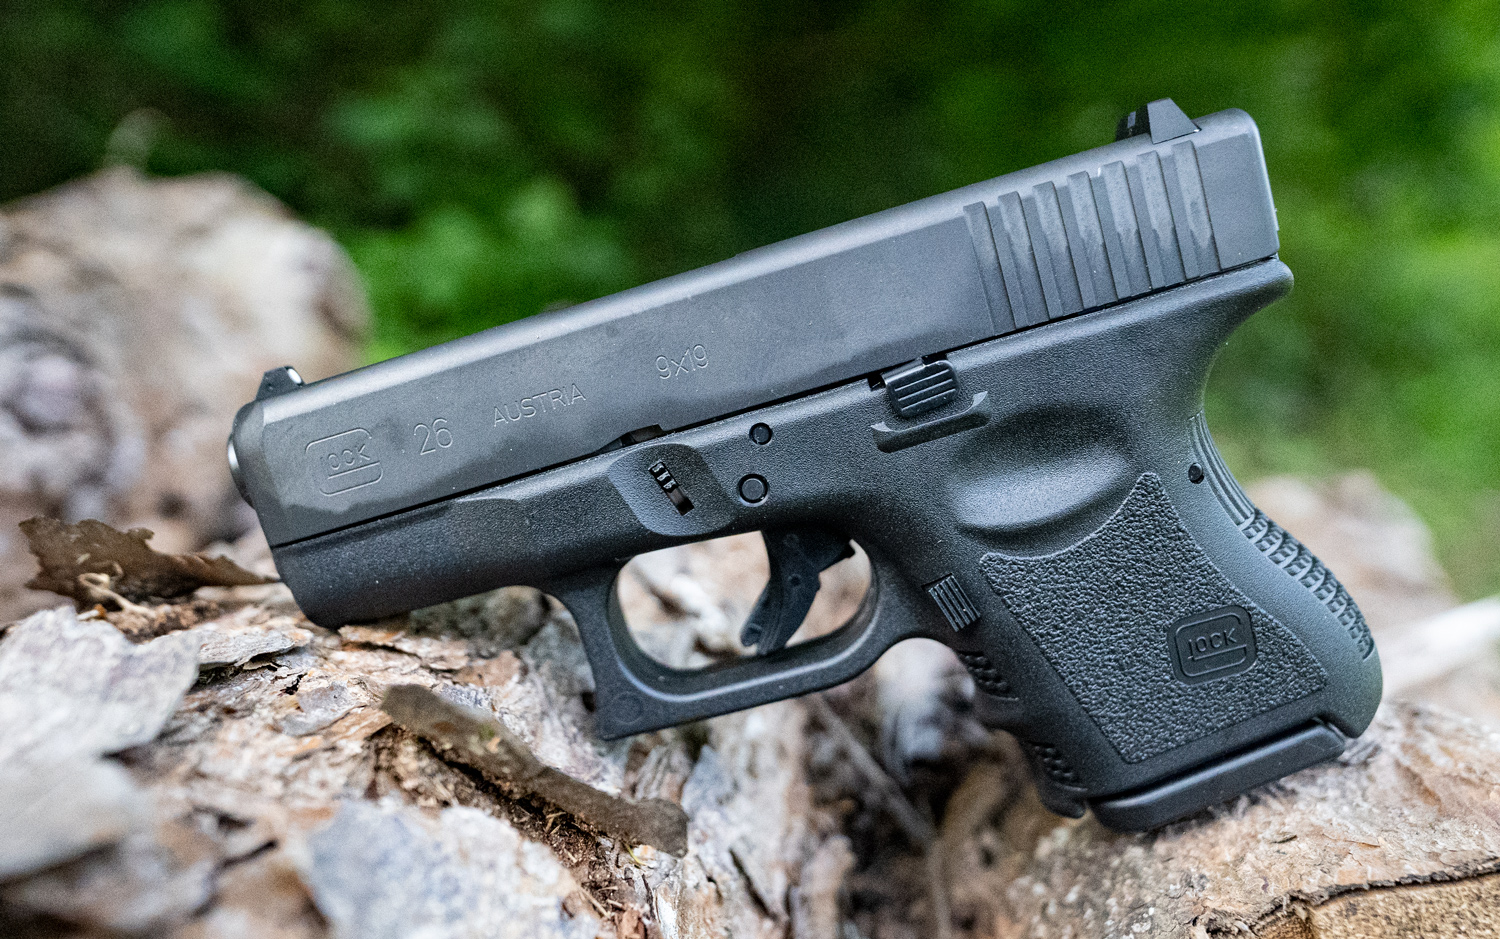 The Glock 26 is another popular choice for concealed carry